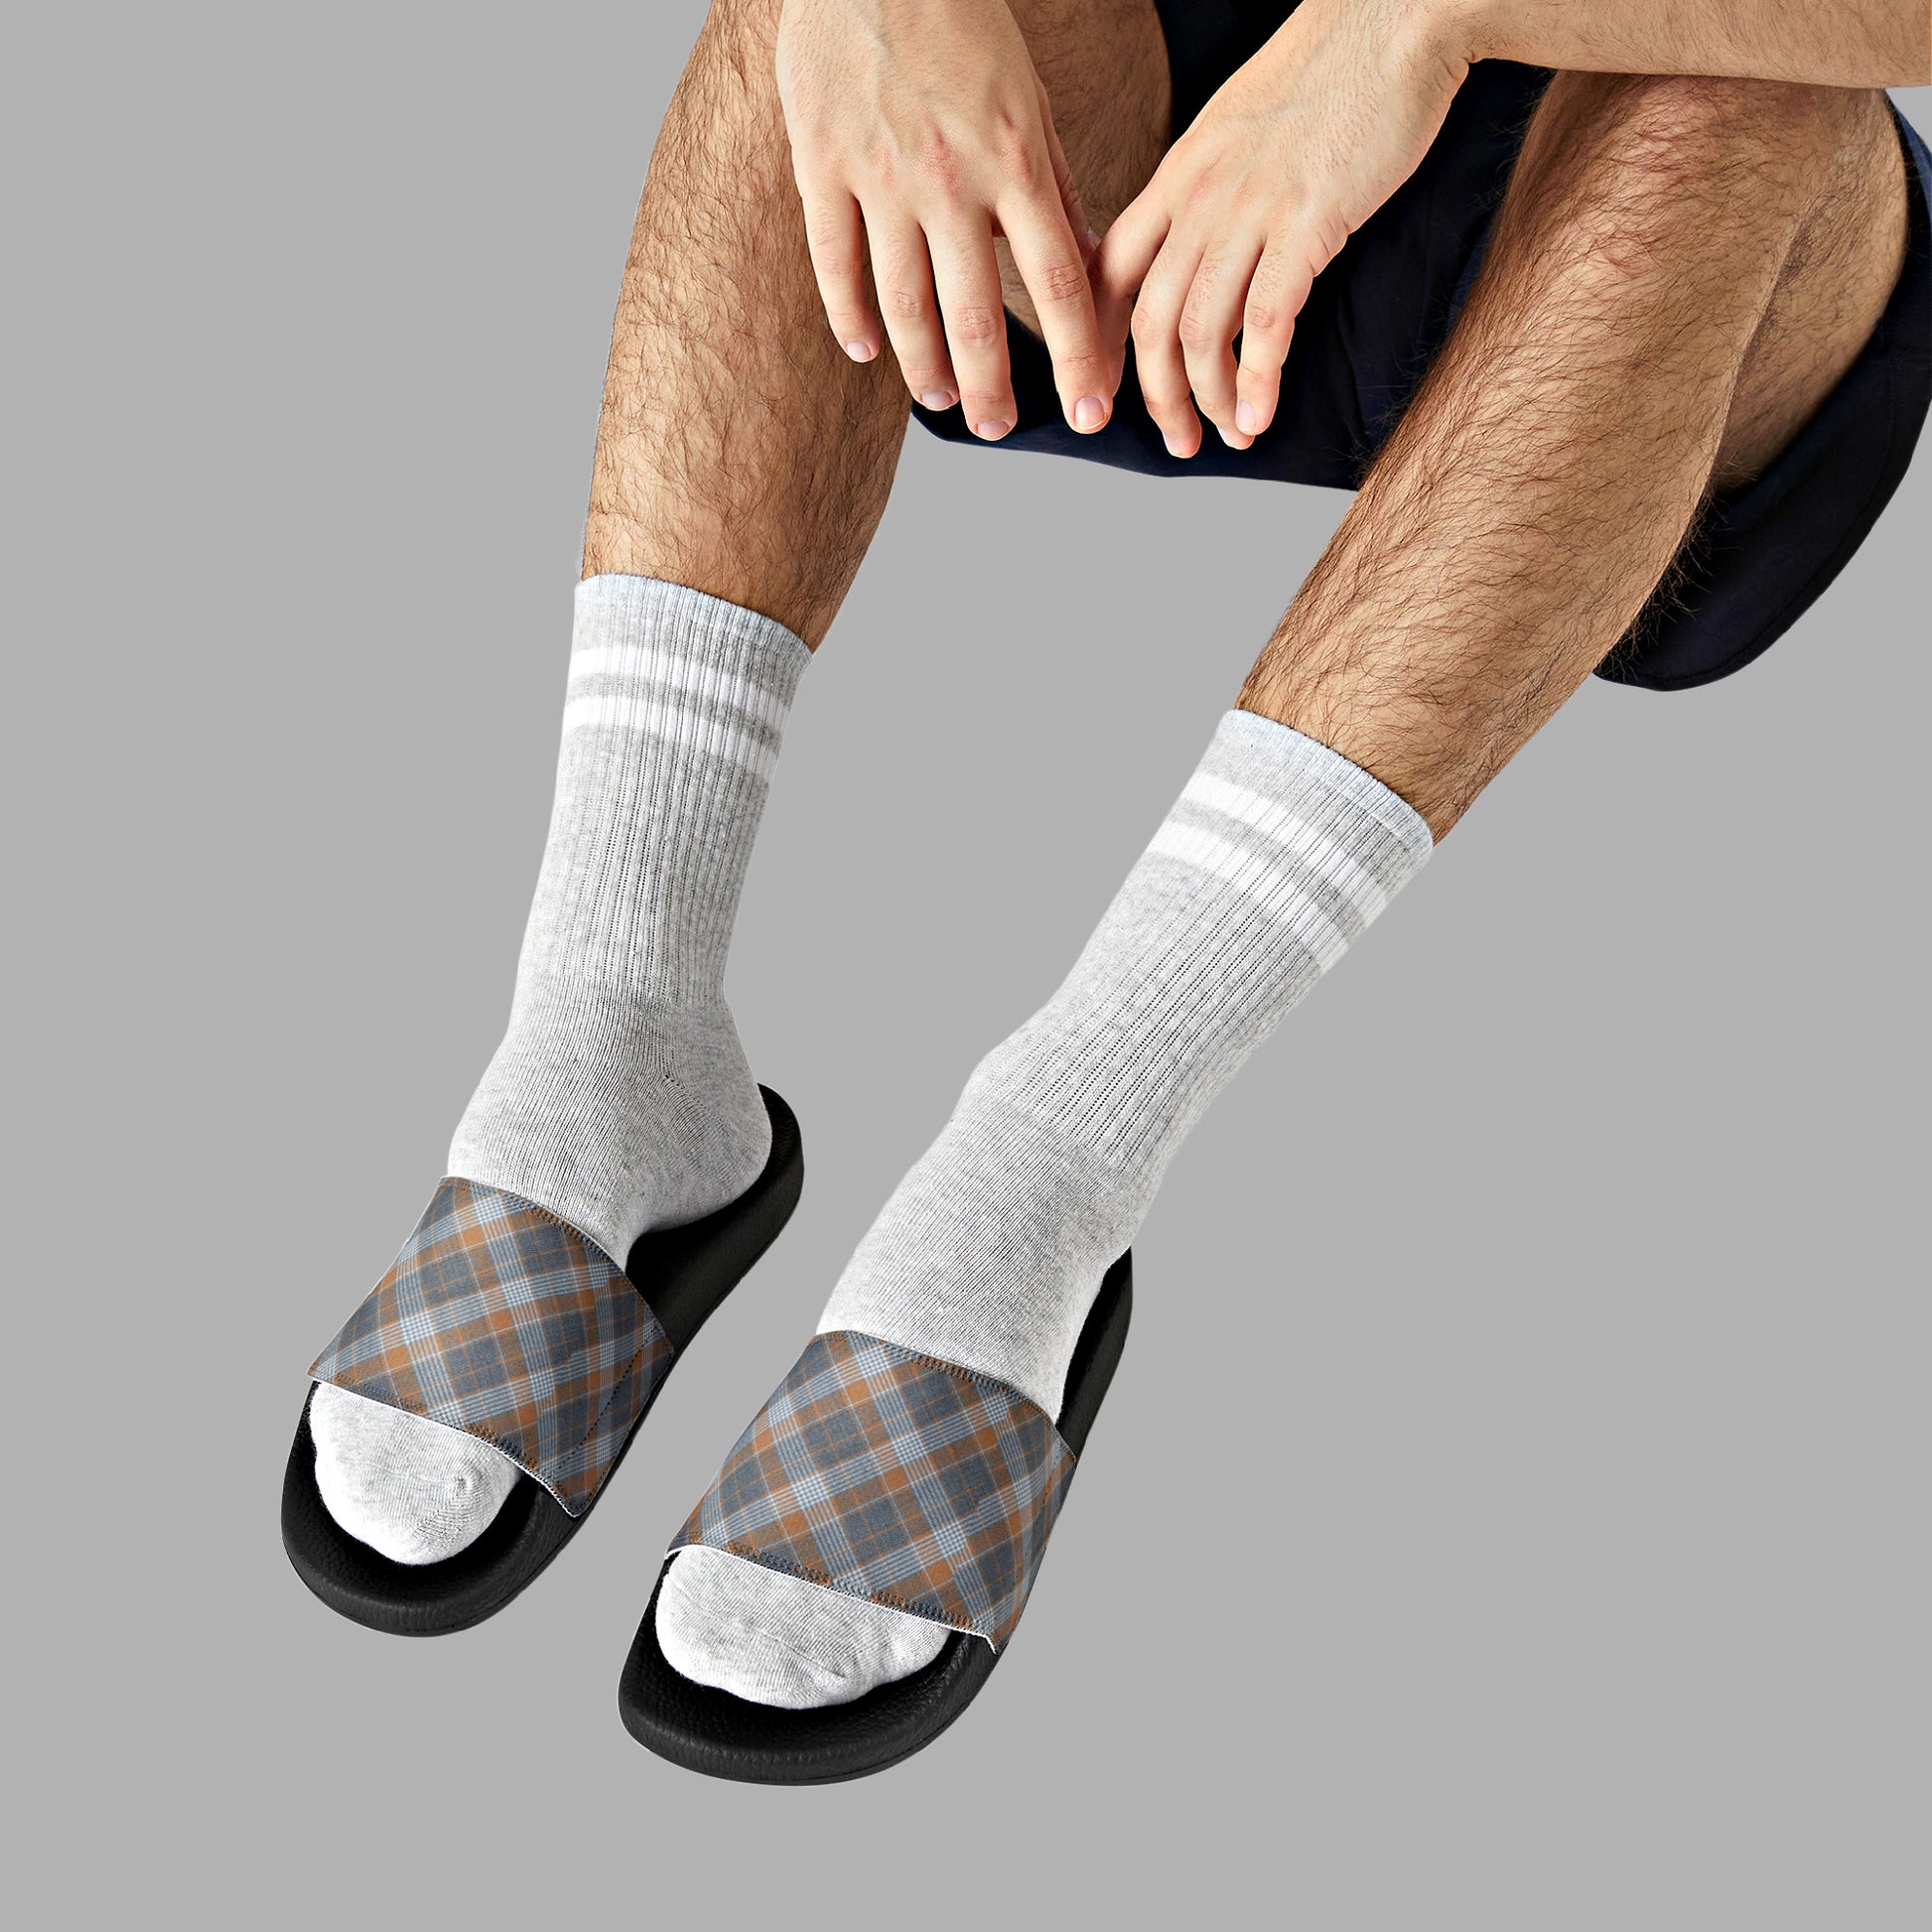 Mock up of a man wearing white socks and our Grey-Plaid sandals